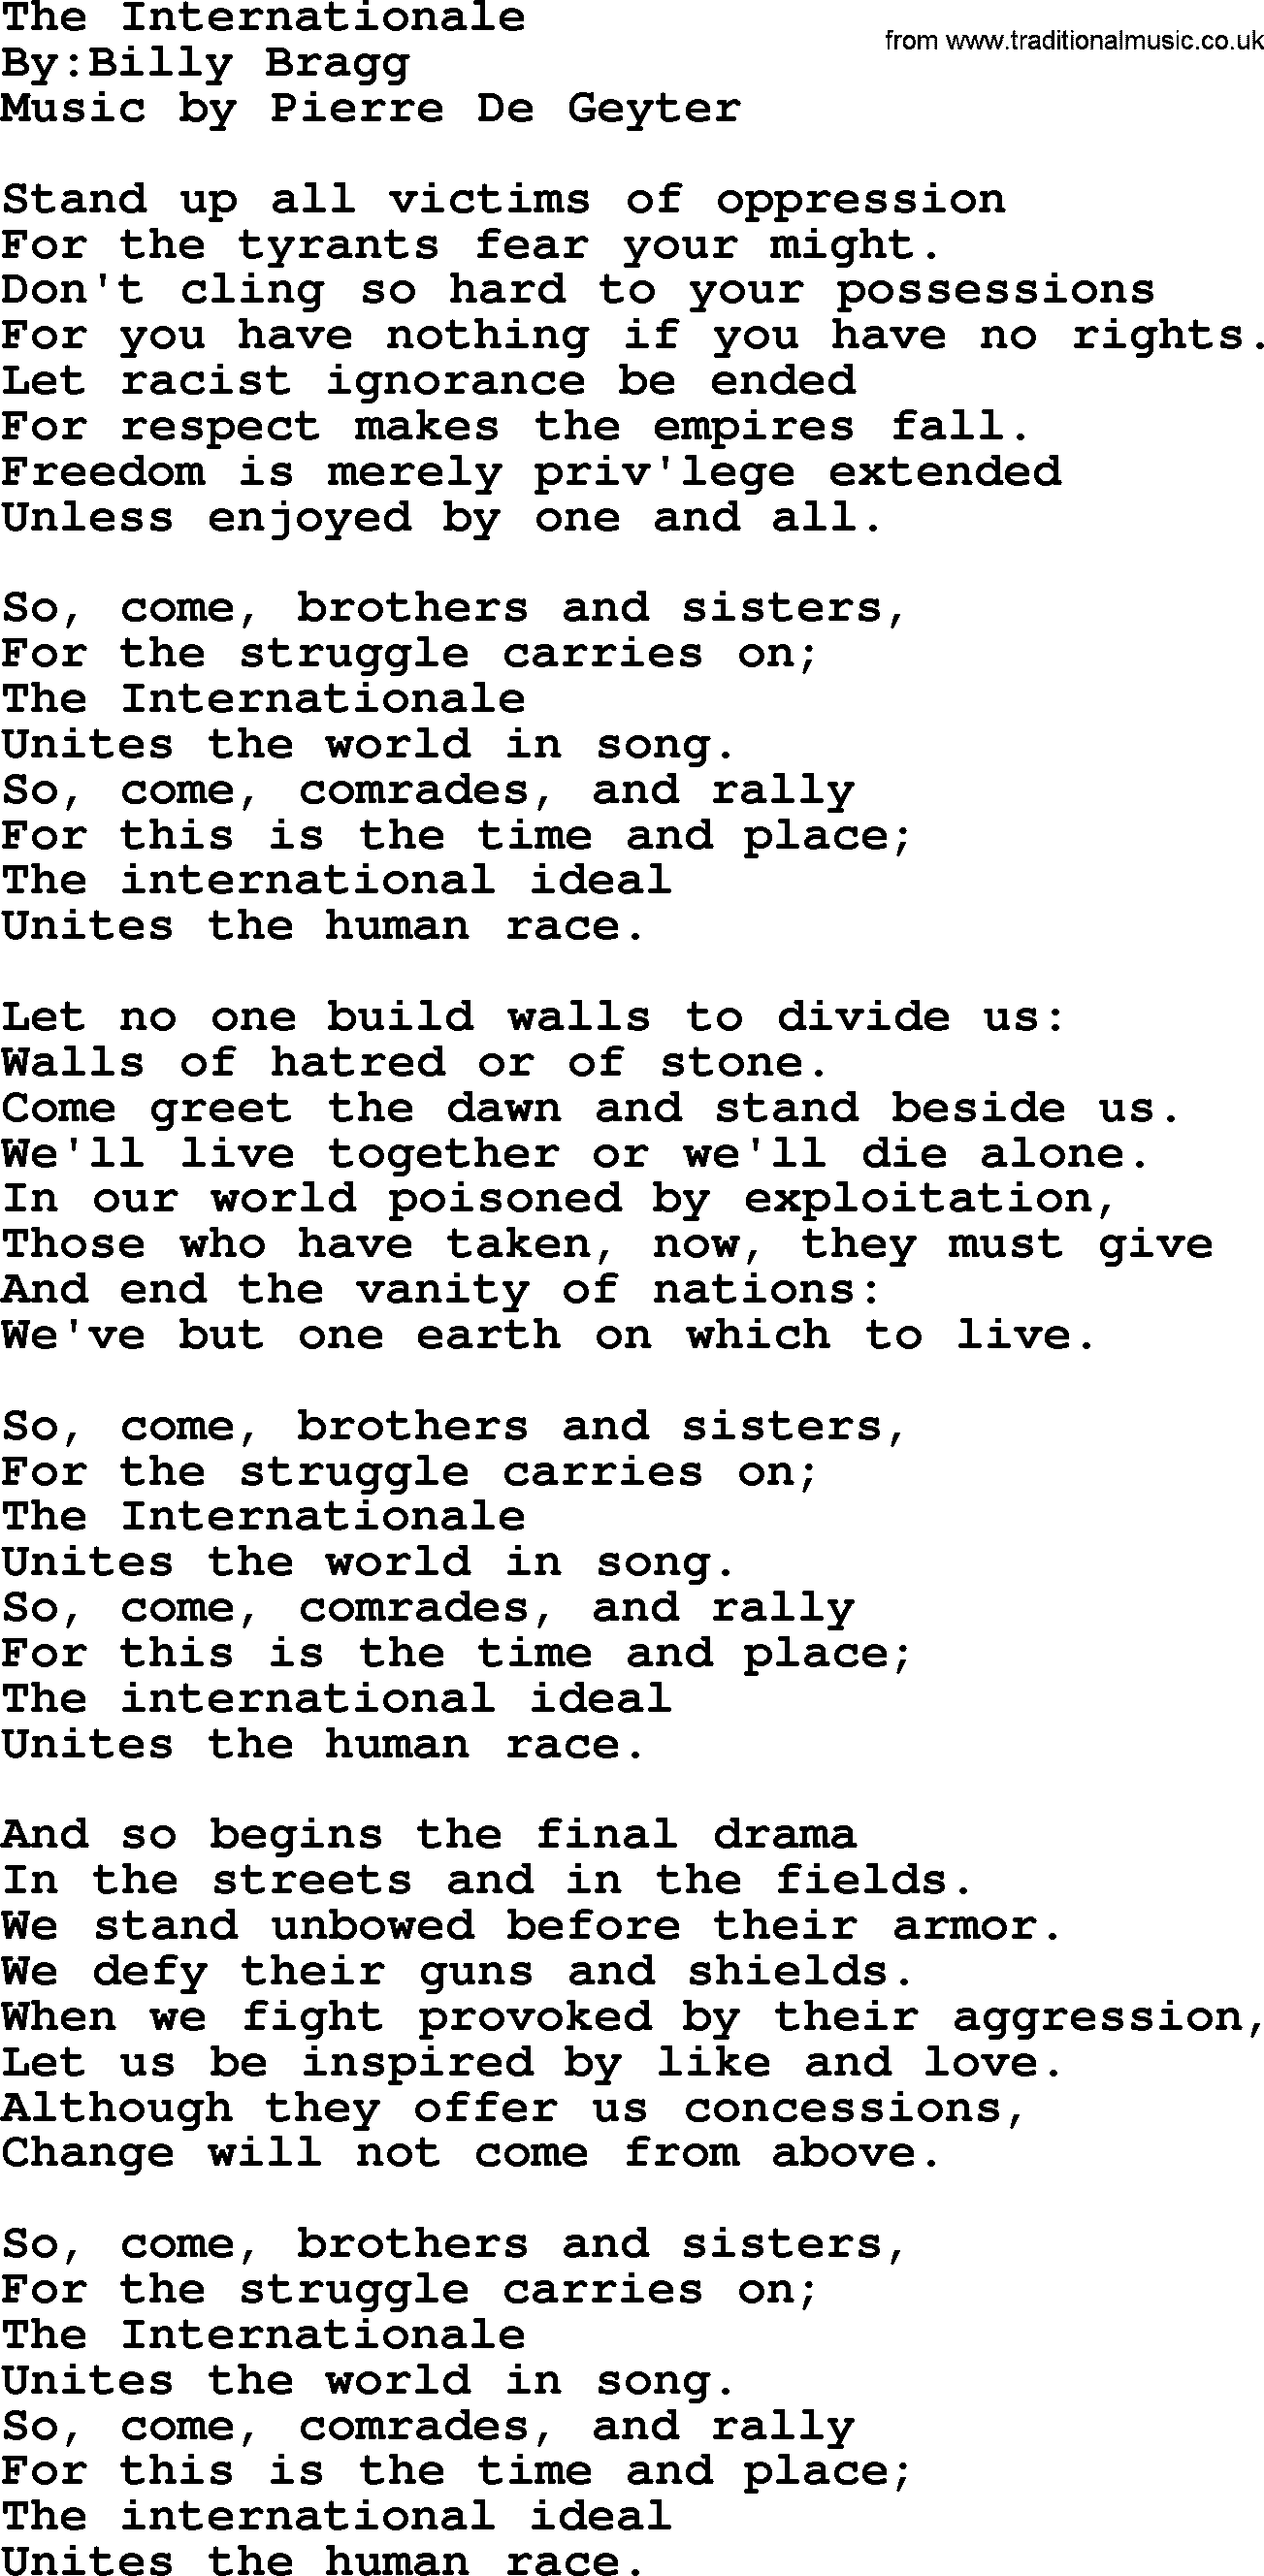 Political, Solidarity, Workers or Union song: The Internationale, lyrics